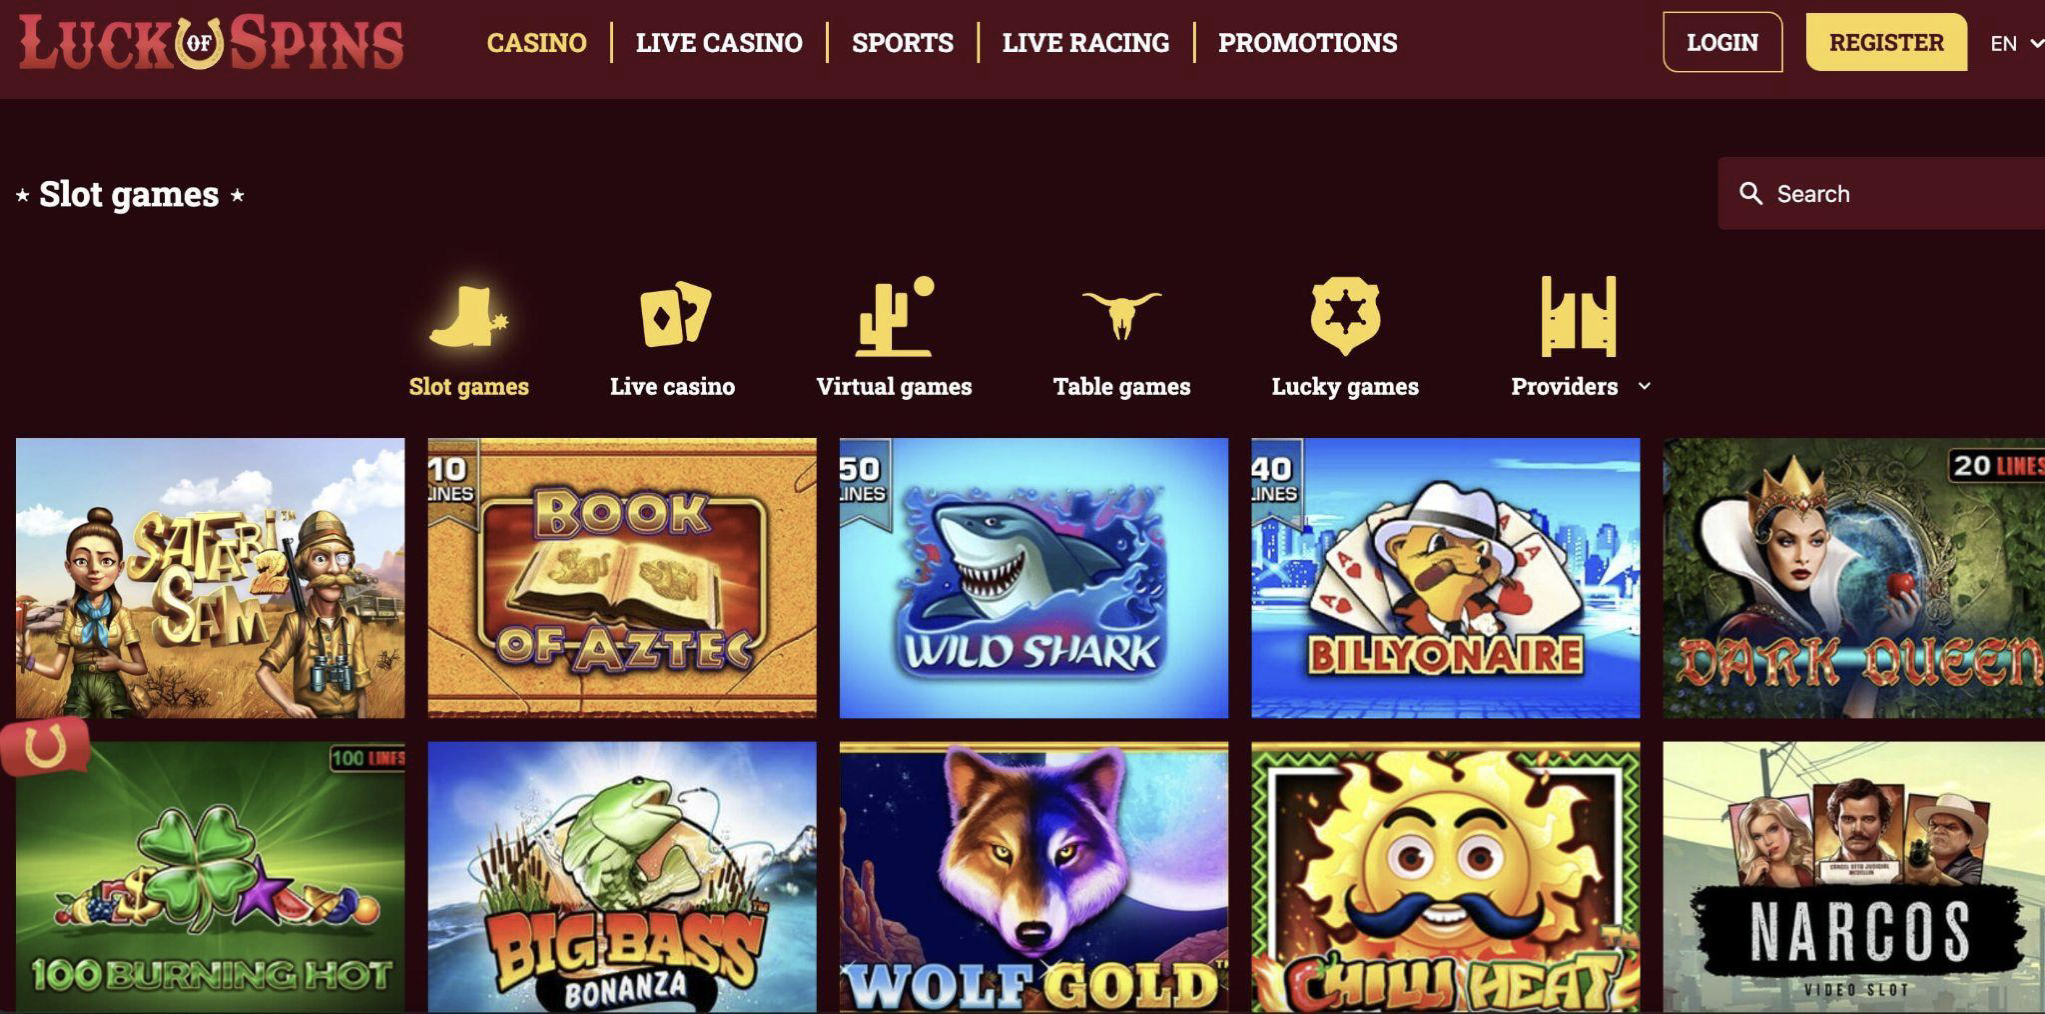 Luck-of-spins-casino